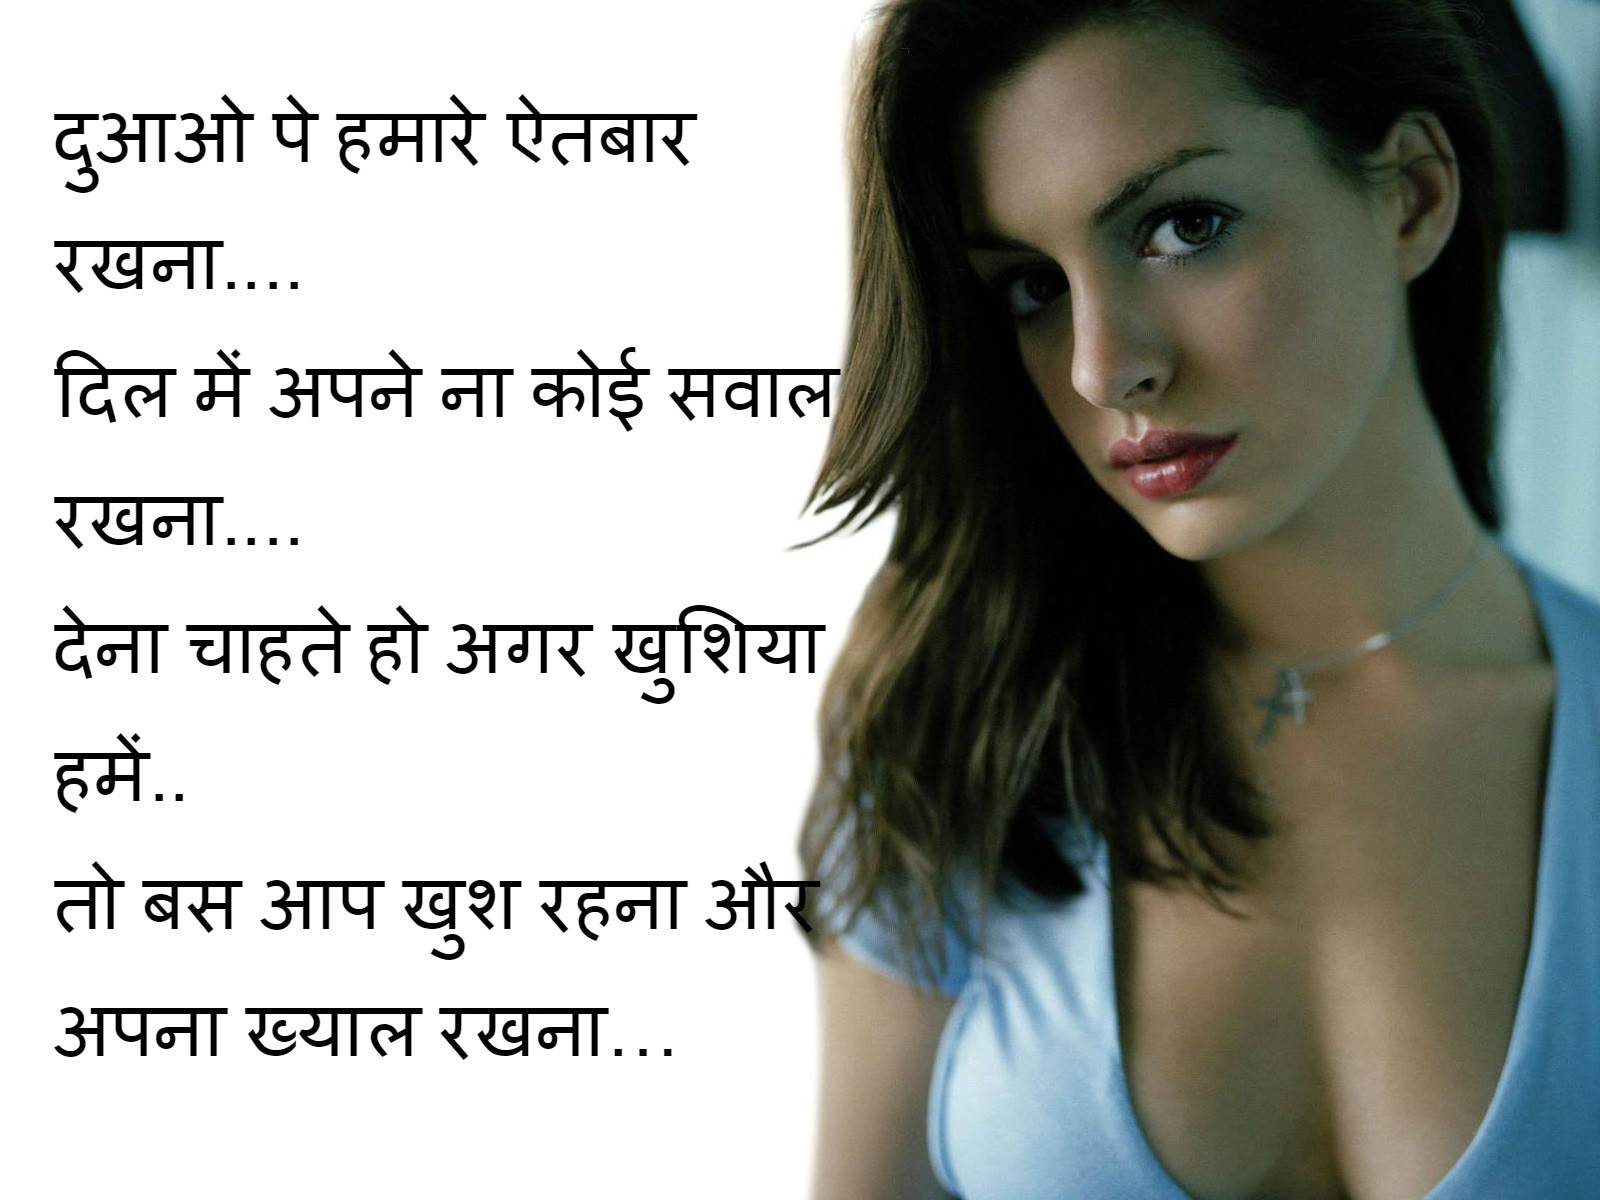 SMS Pic for Girlfriend / Boyfriend, Bollywood Love SMS in Pic, Romantic Lov...